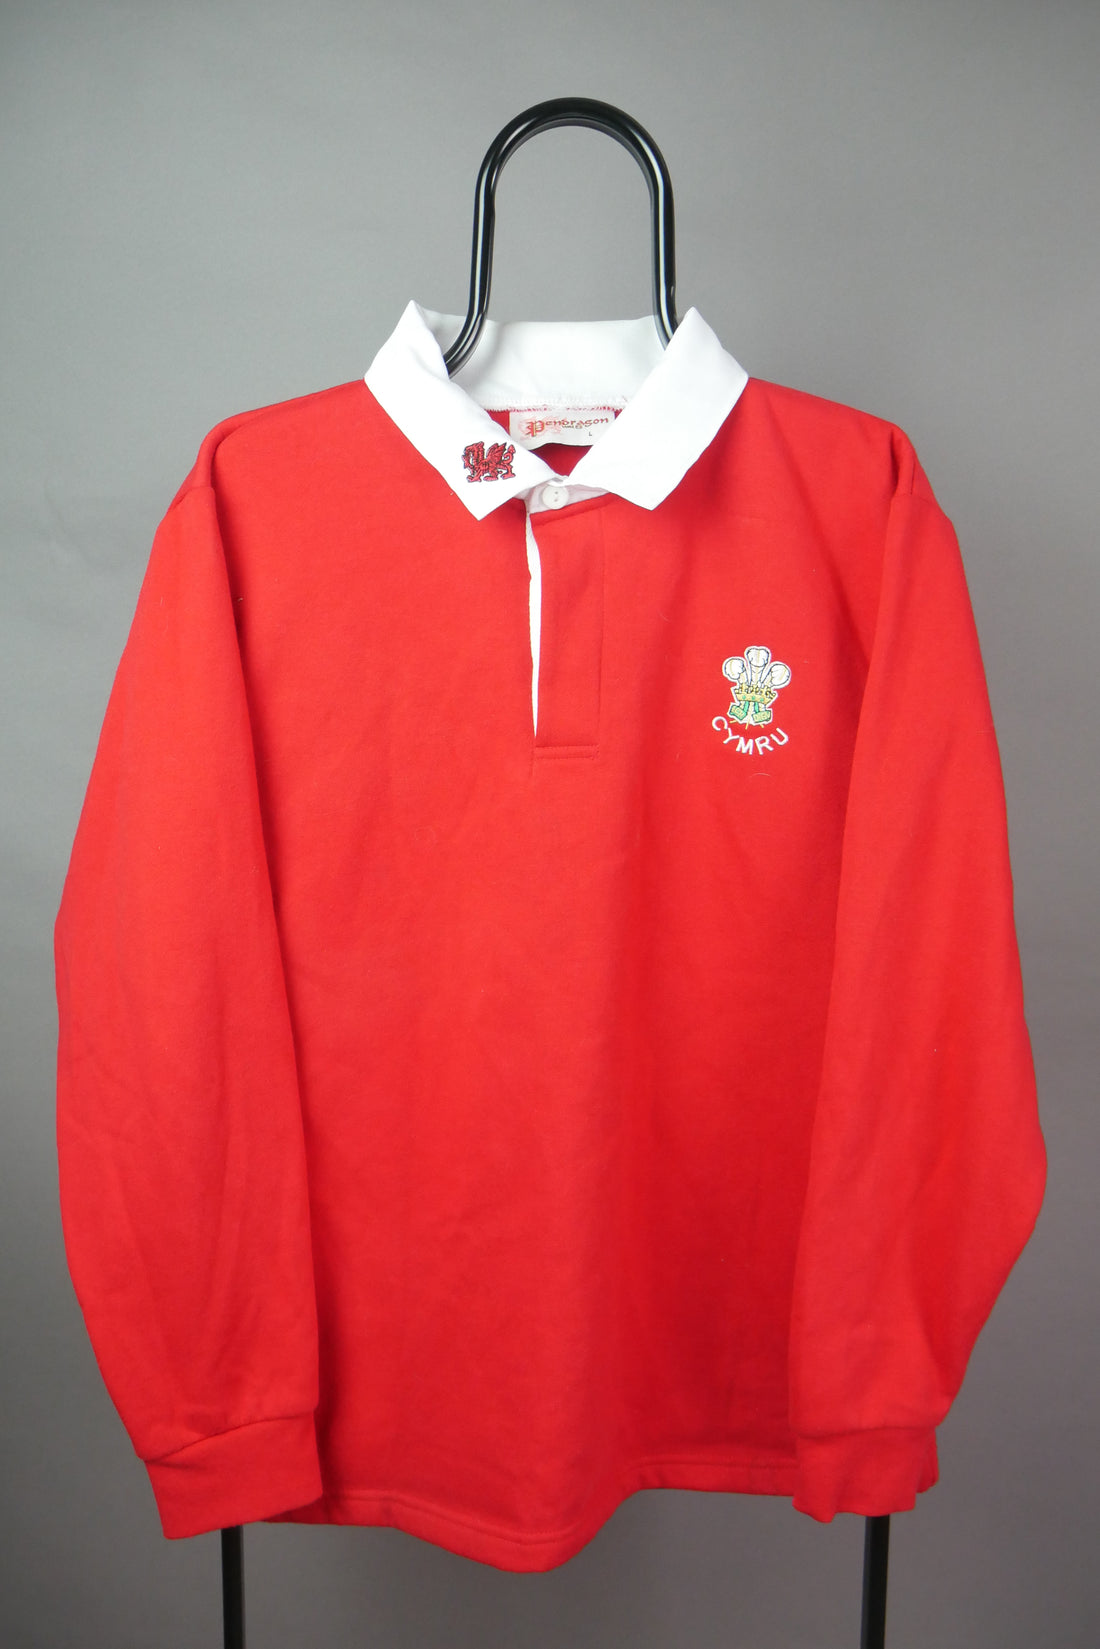 The Wales Rugby Shirt (L)